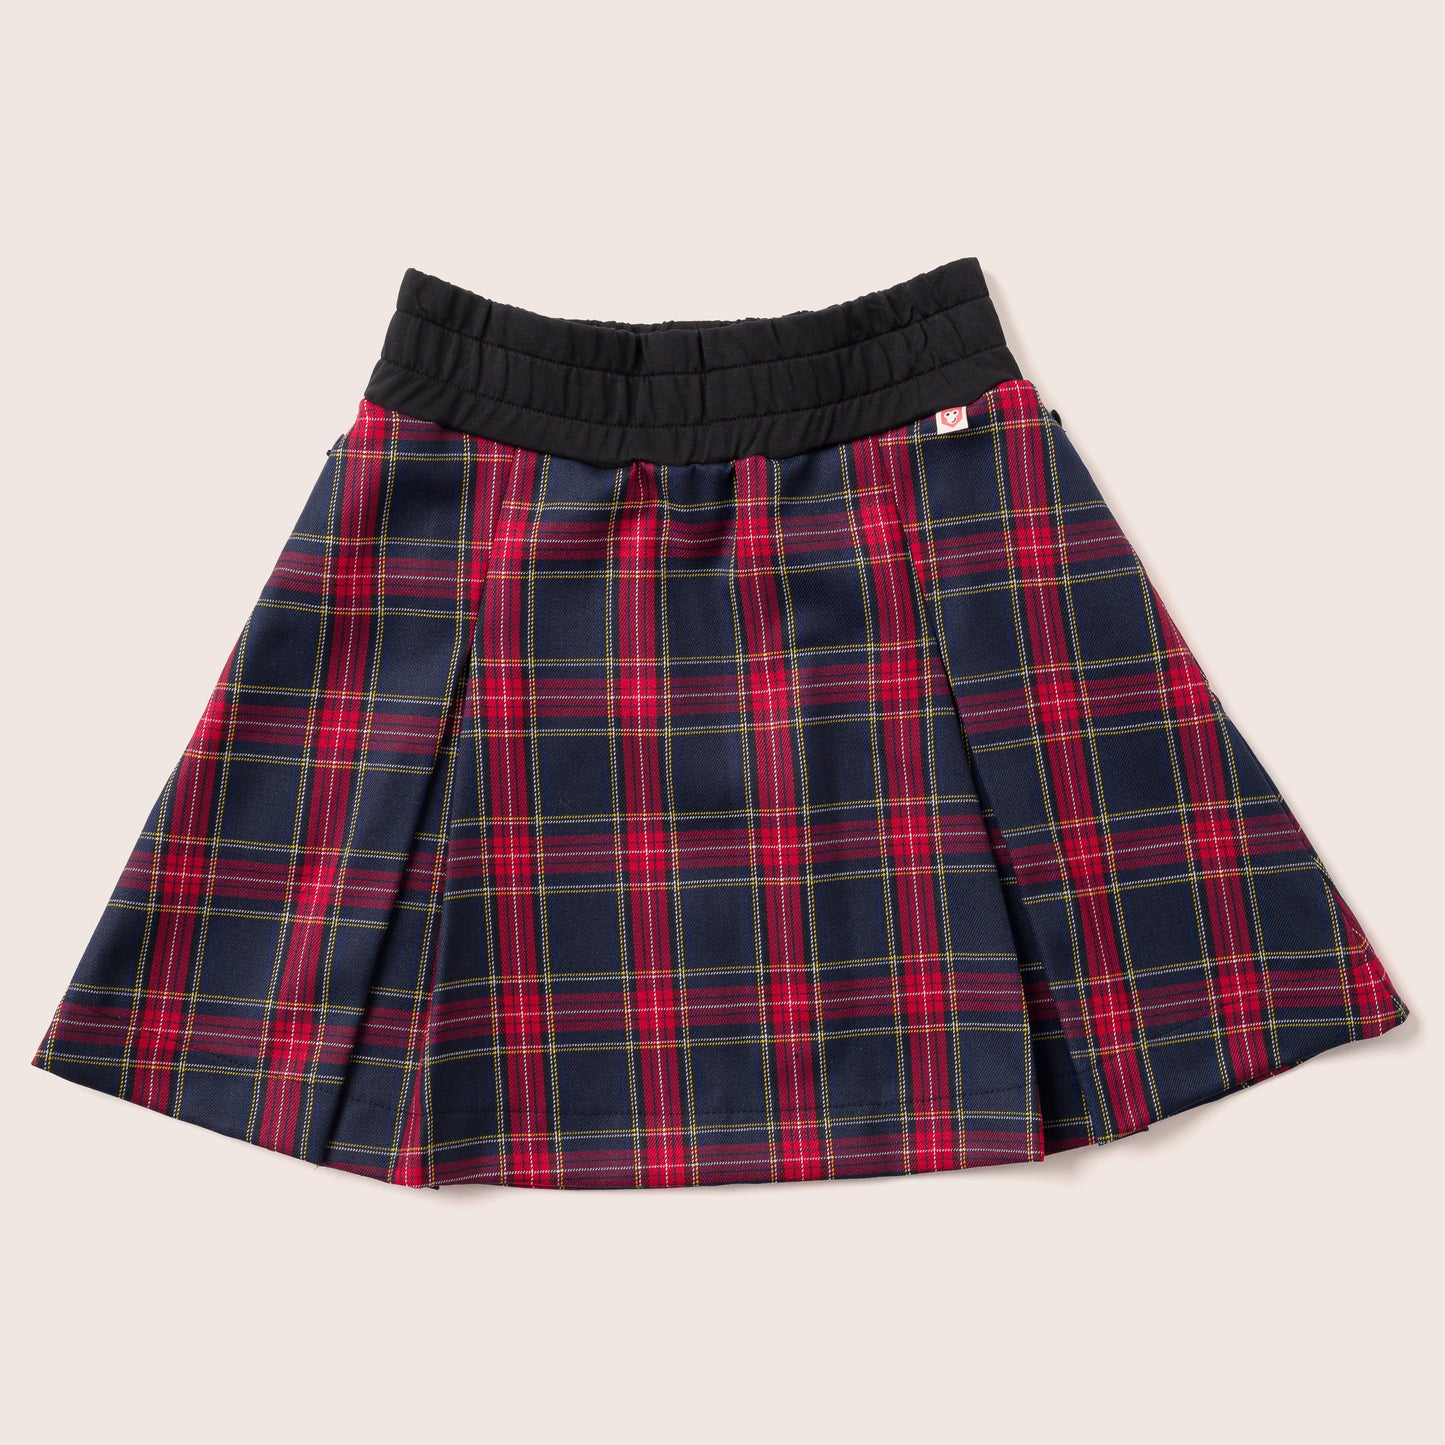 Type 1 Diabetes Clothing - T1d Girls Pleated Skirt High Waisted Plaid A-line Skirts with pockets | Our Pocket Hero